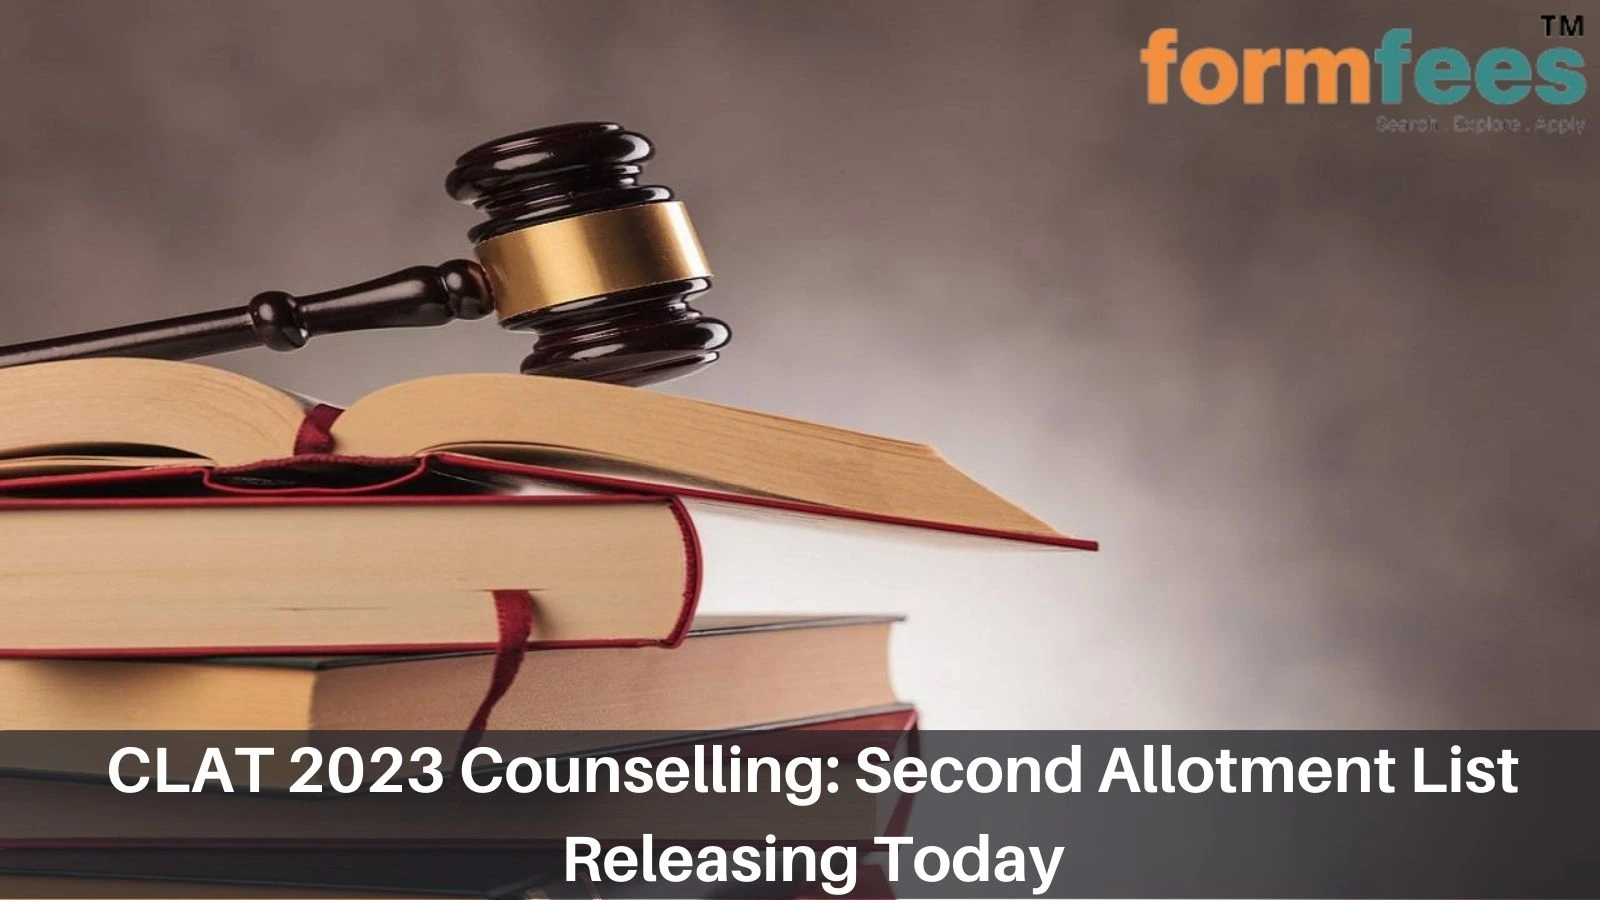 CLAT 2023 Counselling: Second Allotment List Releasing Today